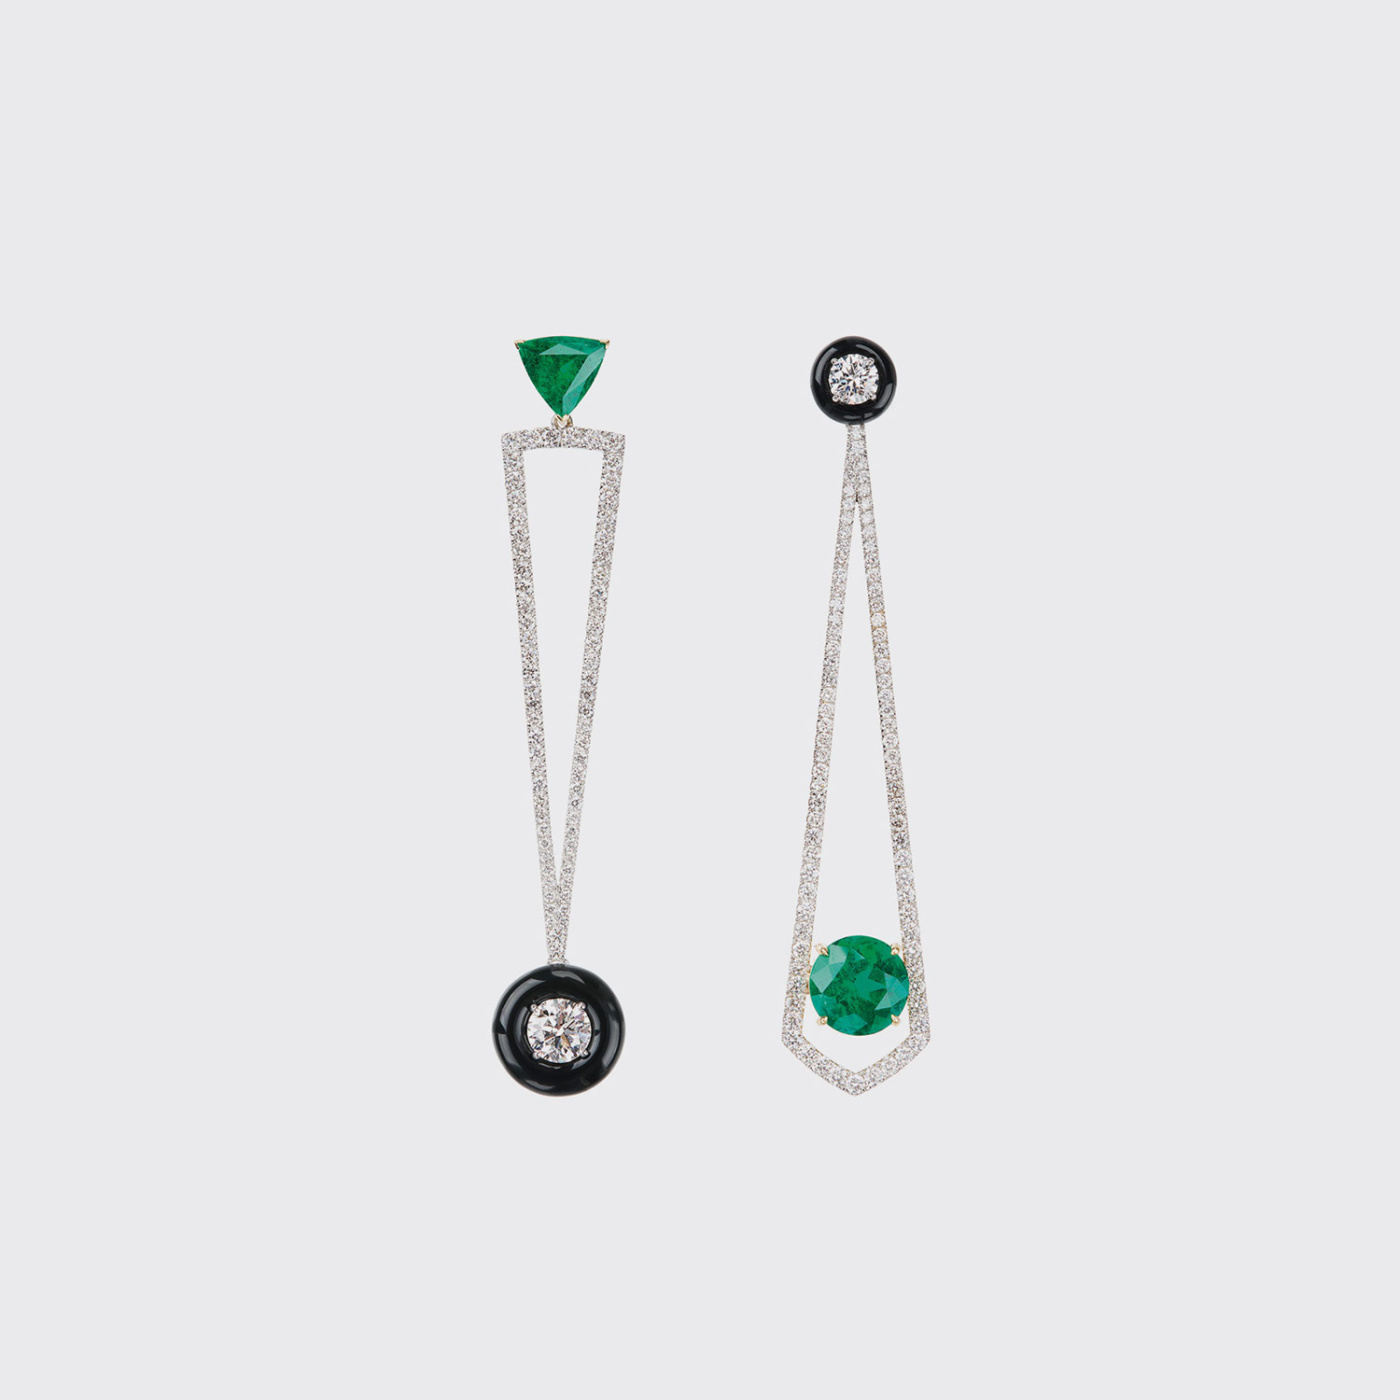 White gold mismatched long earrings with emeralds, white diamonds and black enamel